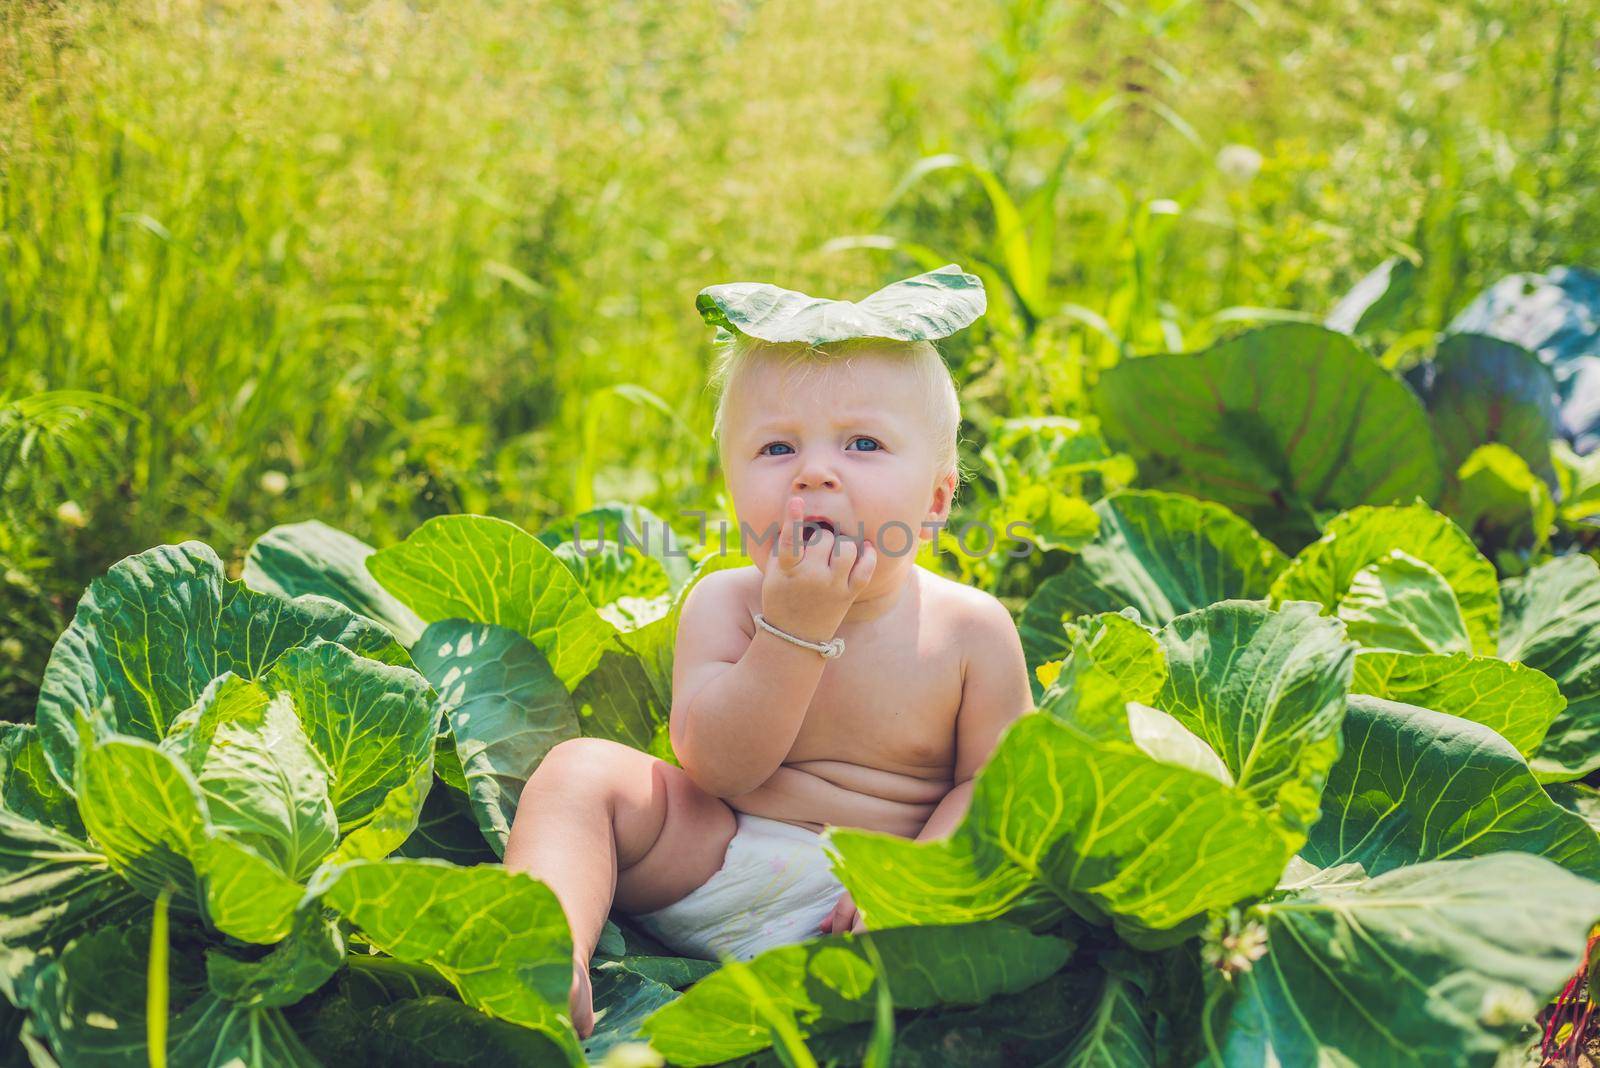 A baby sitting among the cabbage. Children are found in cabbage.